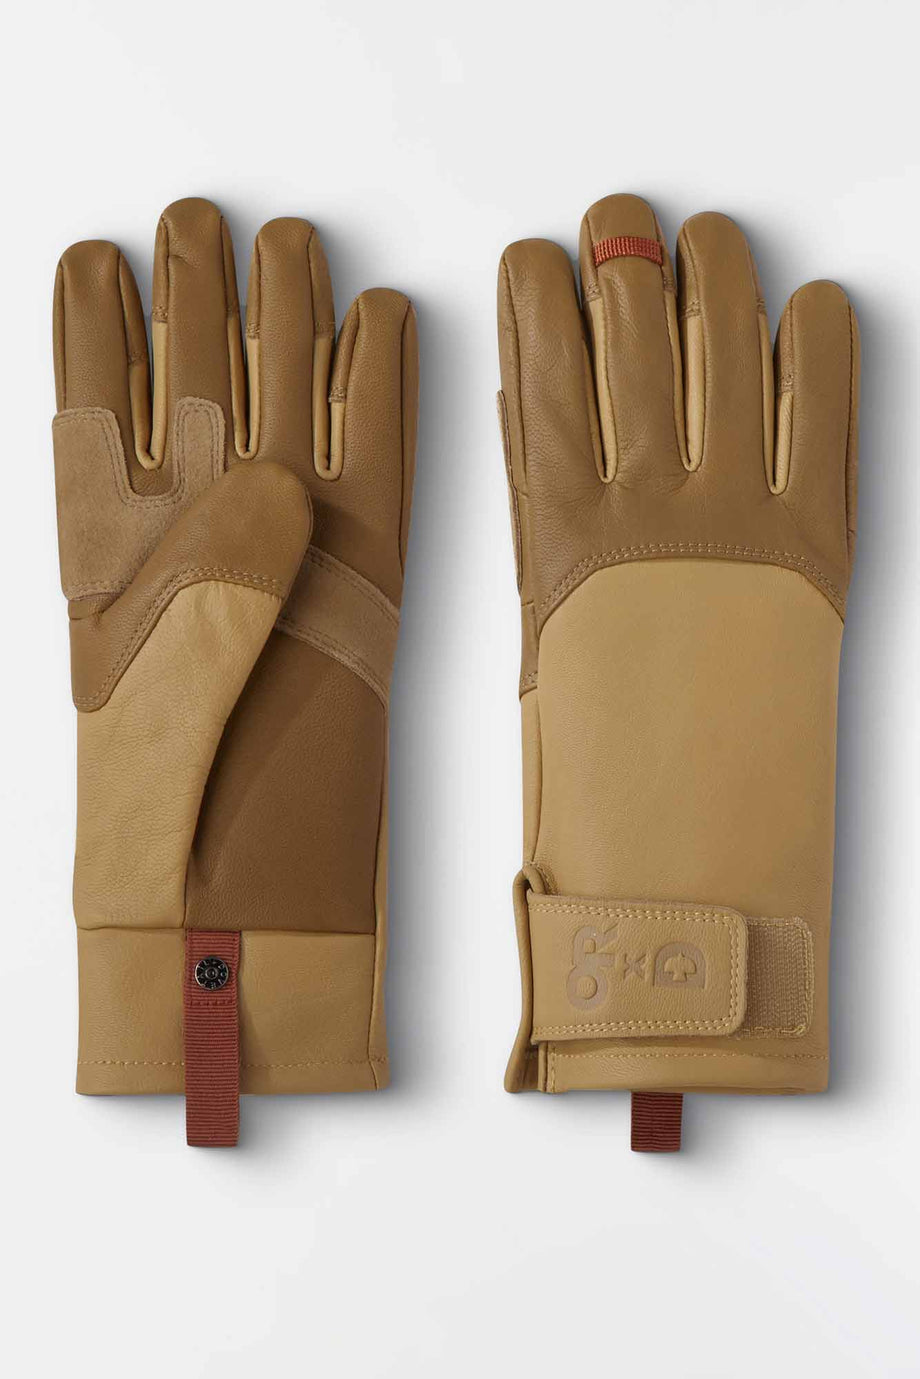 OR X Dovetail Women's Leather Field Gloves